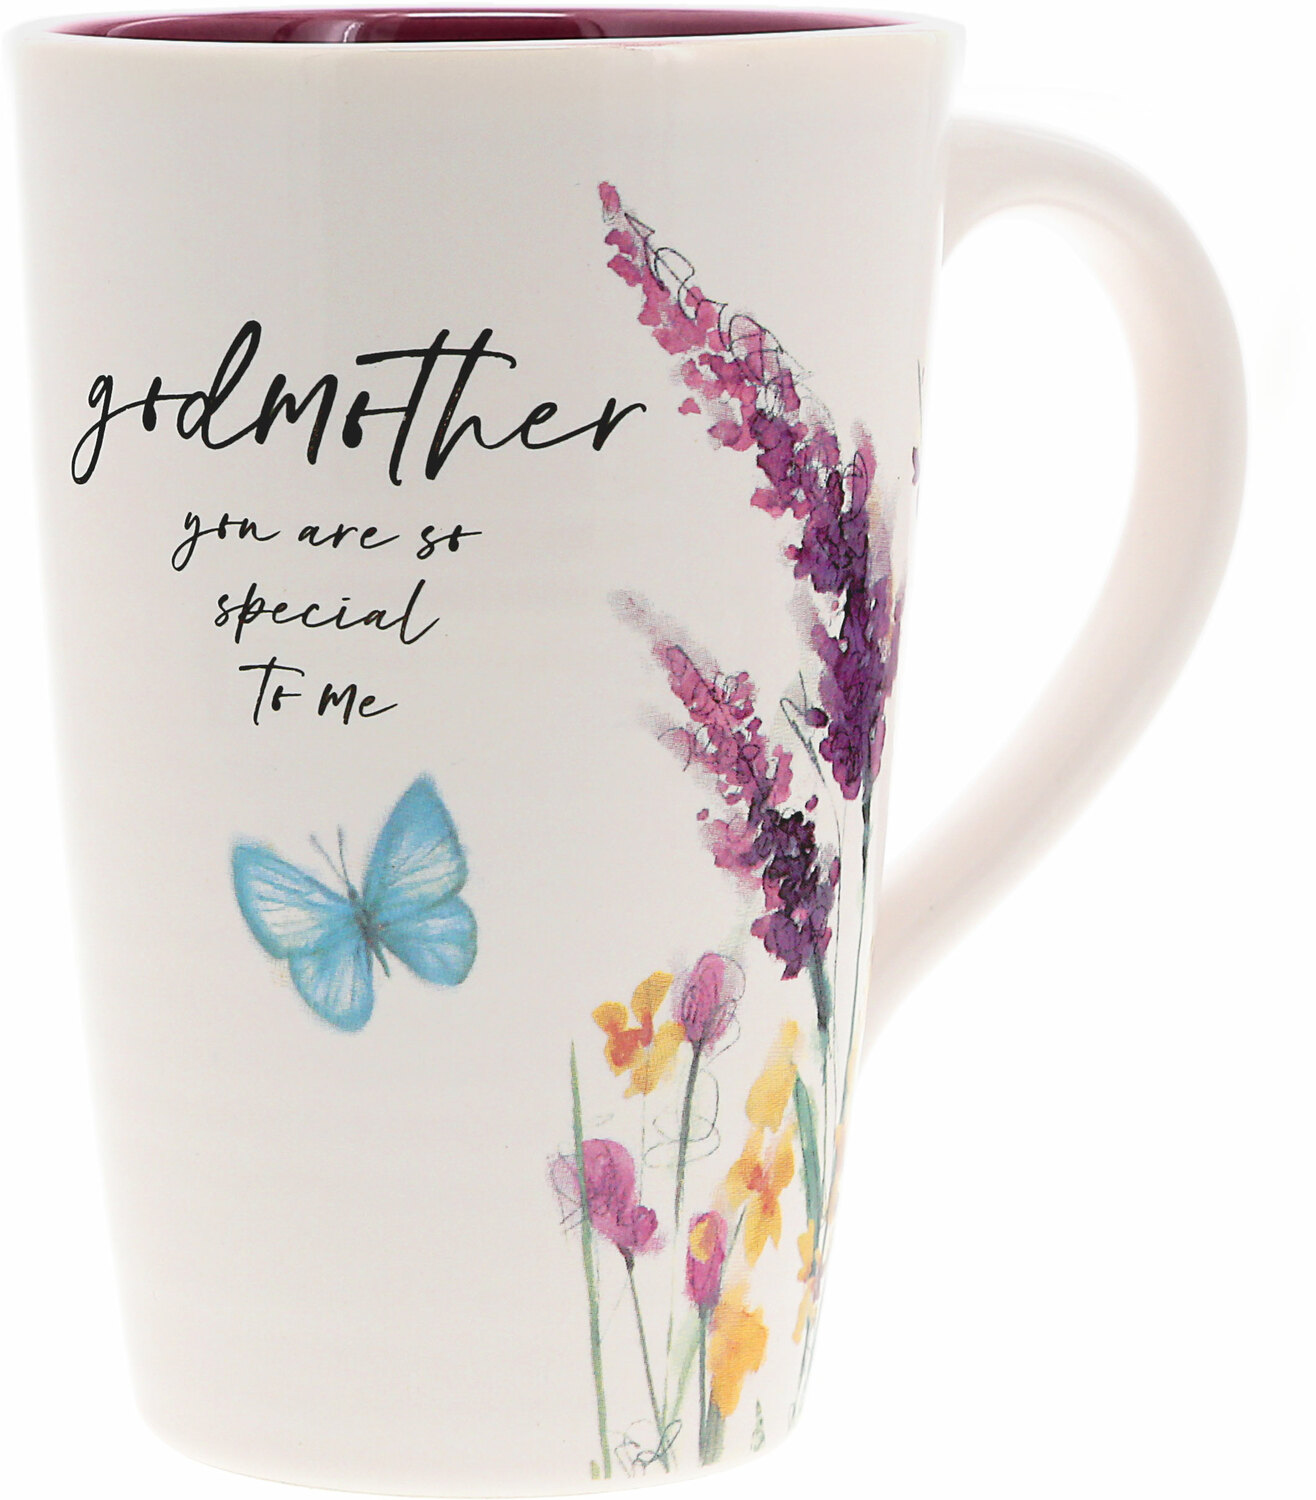 Godmother by Meadows of Joy - Godmother - 17 oz. Cup